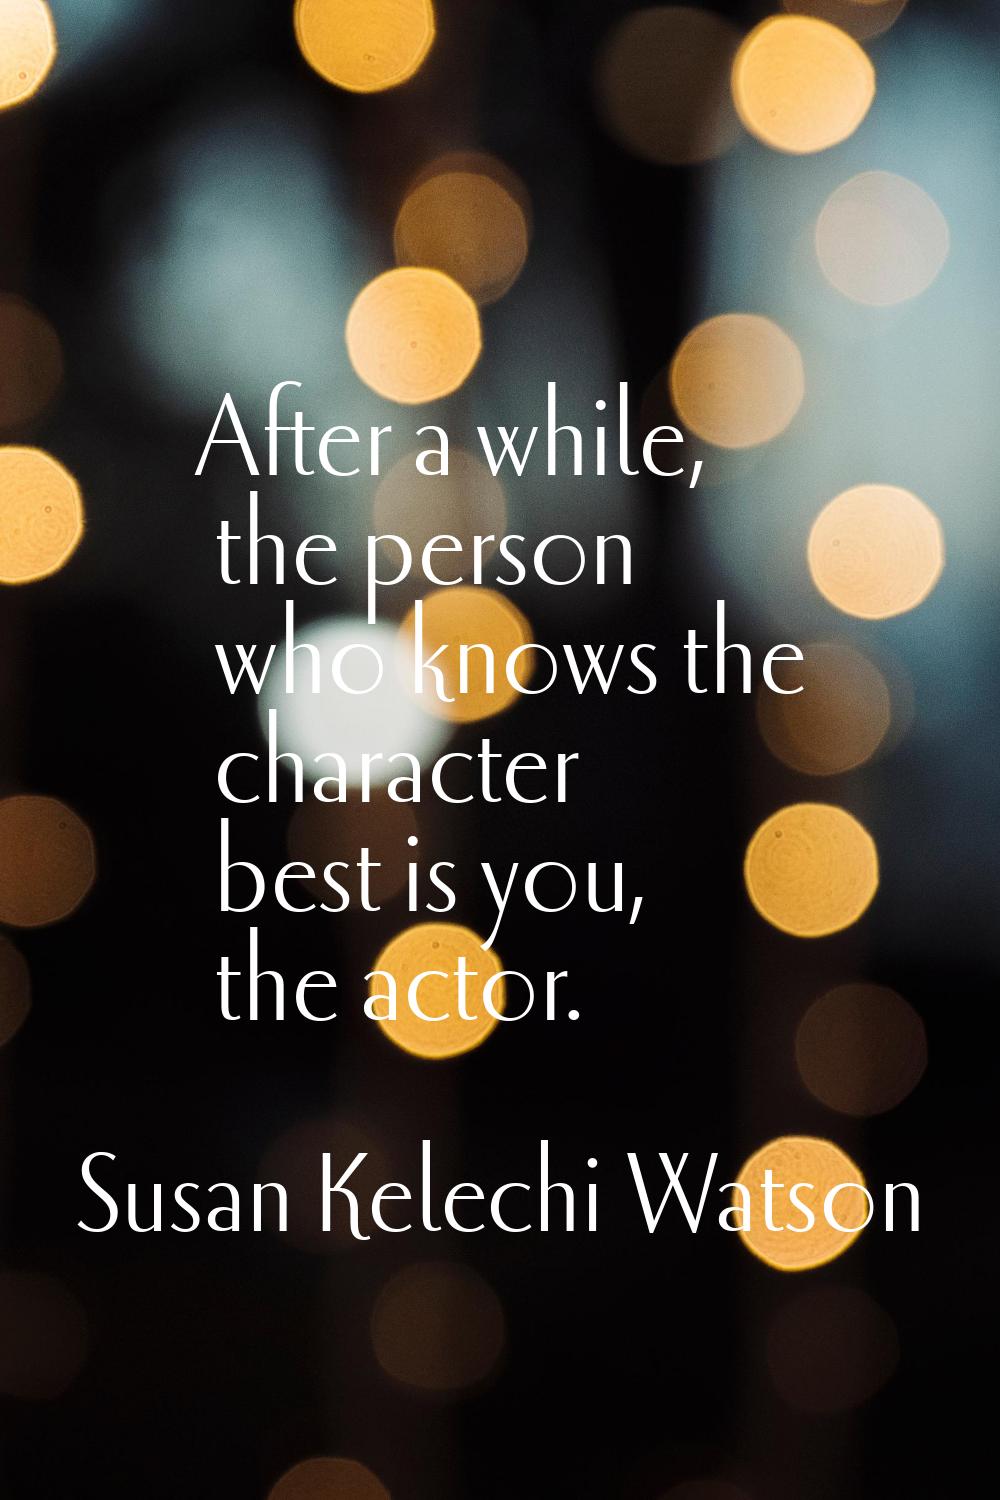 After a while, the person who knows the character best is you, the actor.